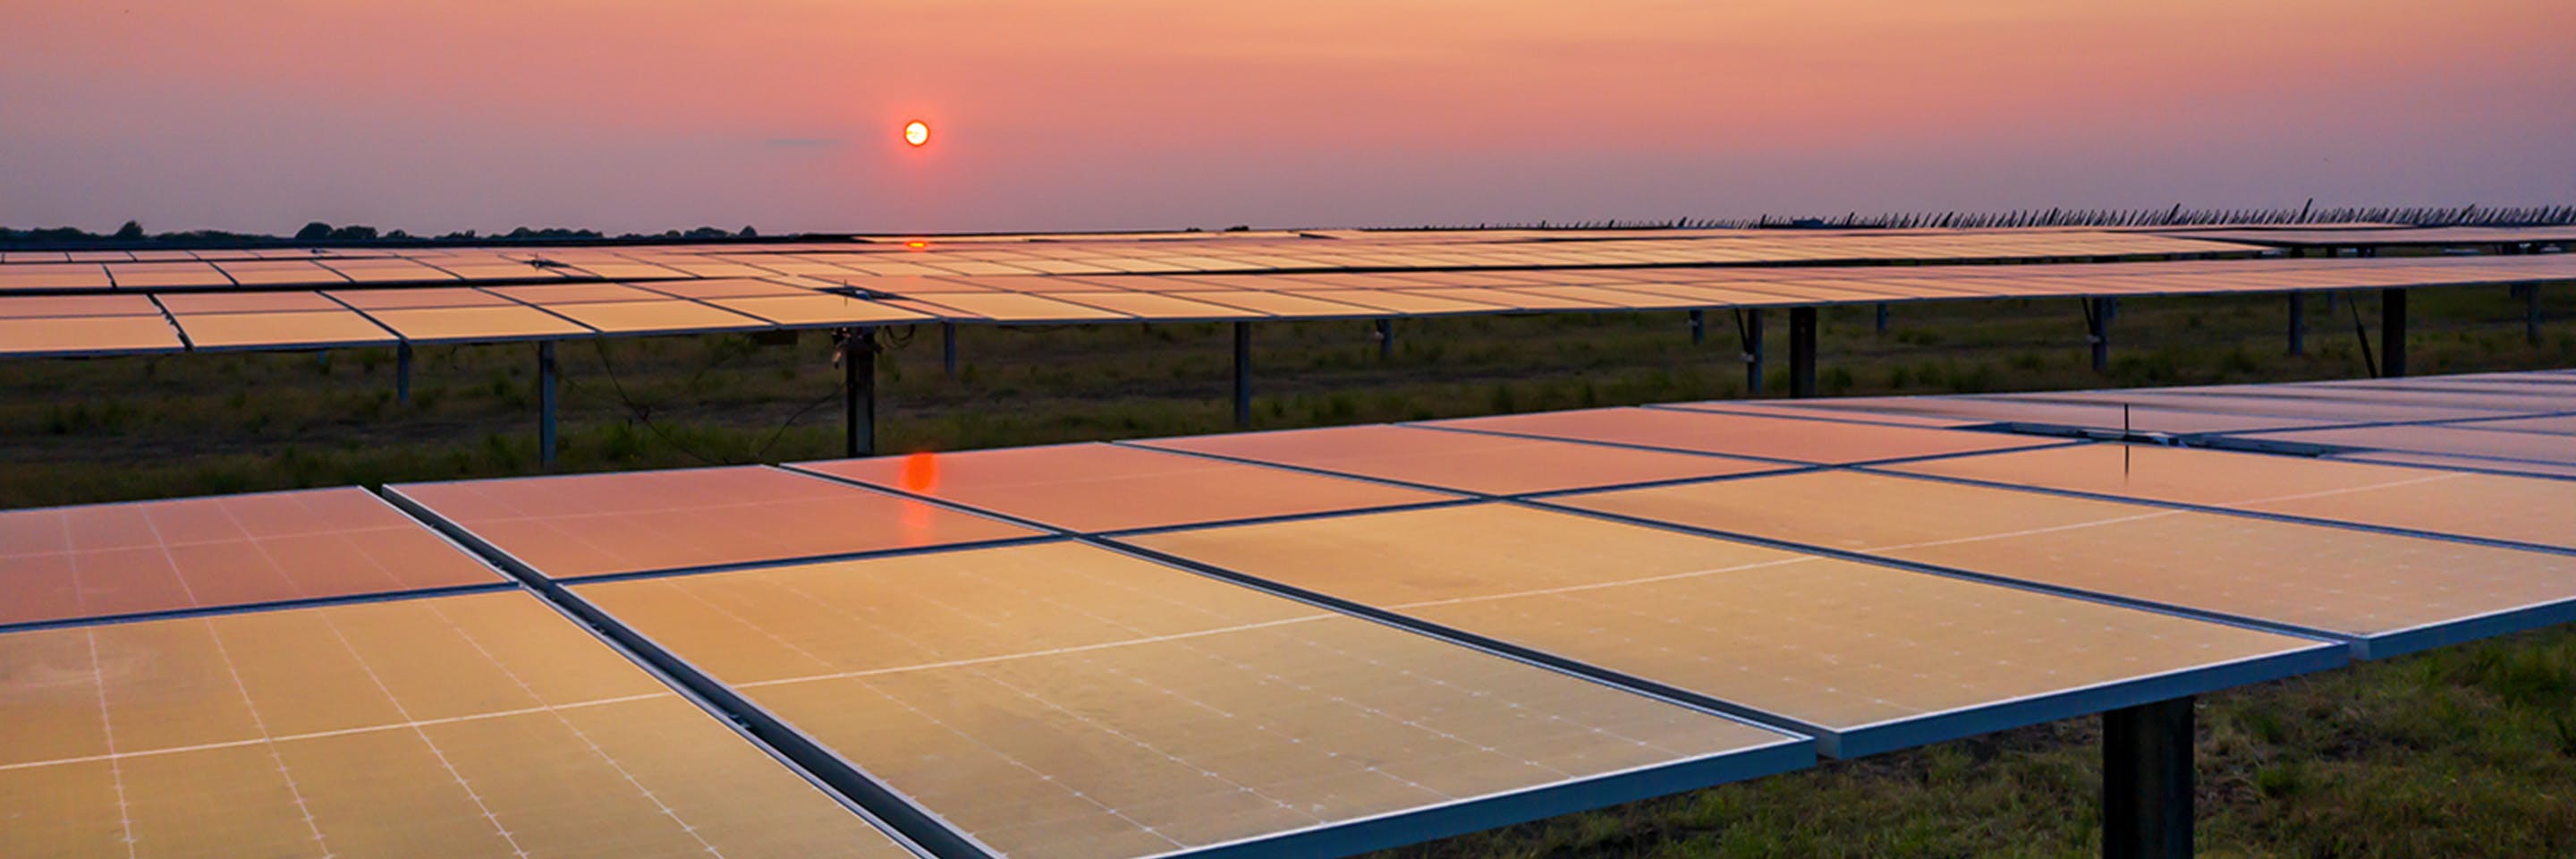 One of the largest solar facilities in the United States will power the sustainability goals of project partners – ranging from a university to Fortune 100 companies.